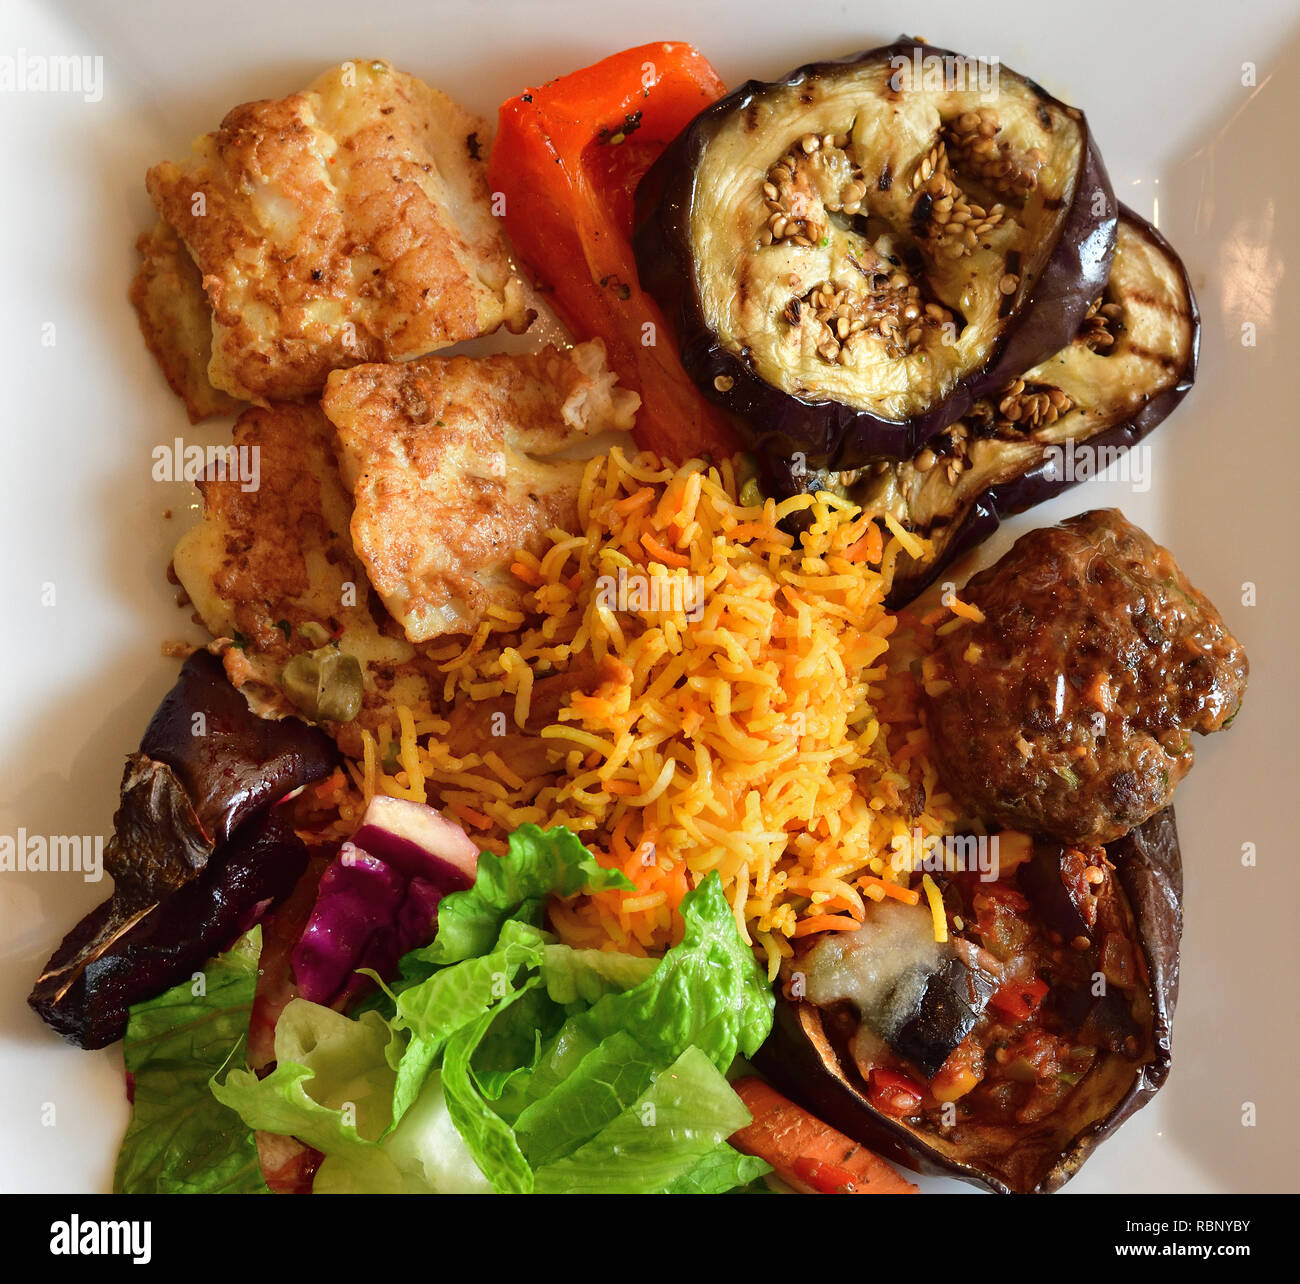 Rice and grilled vegetables and fish on a plate. Top view Stock Photo